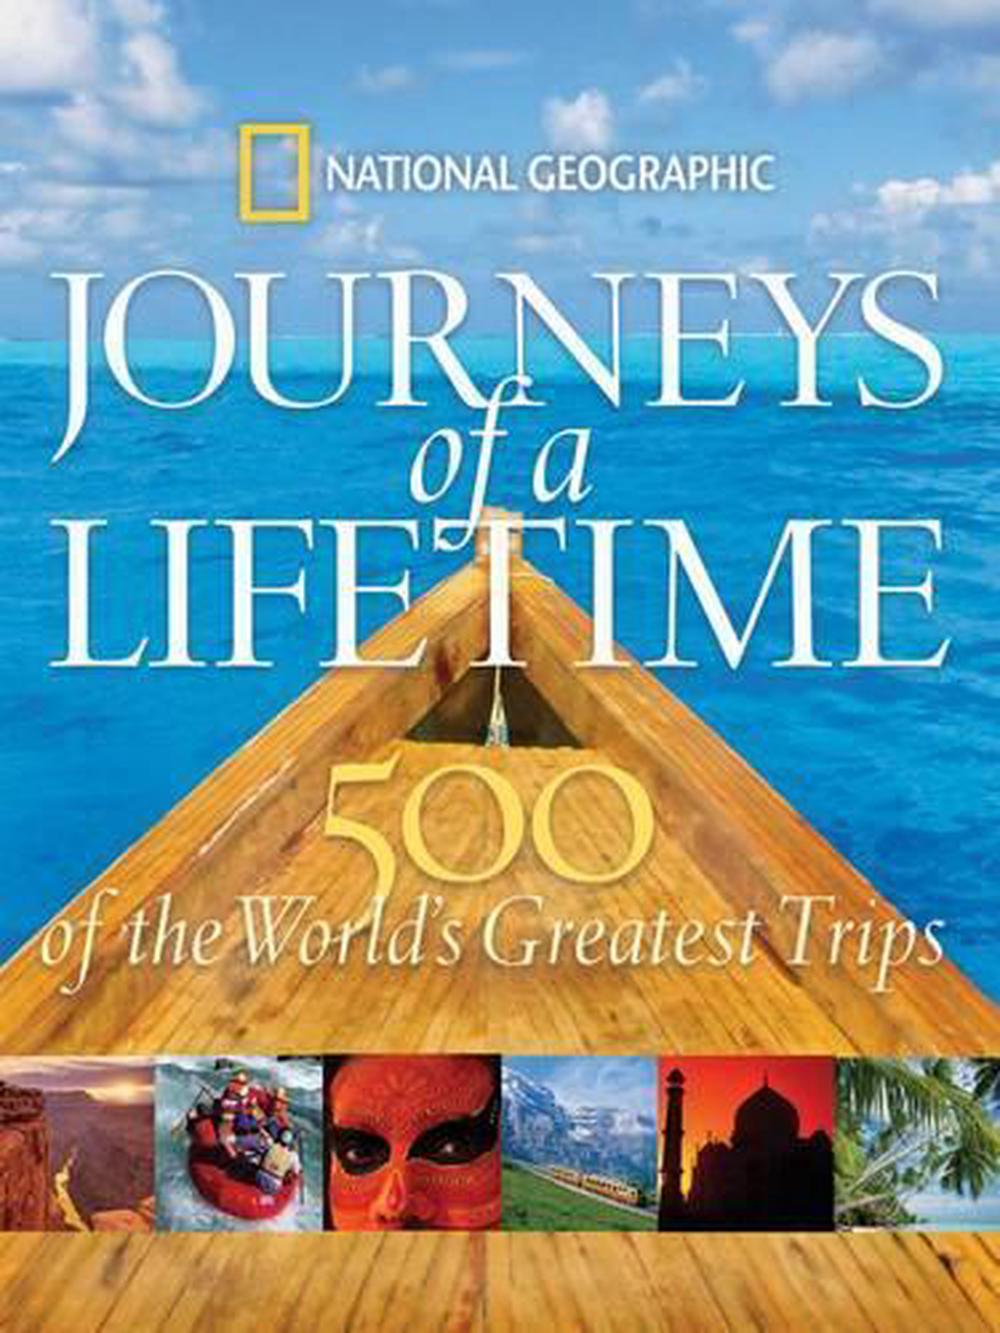 national geographic best trips